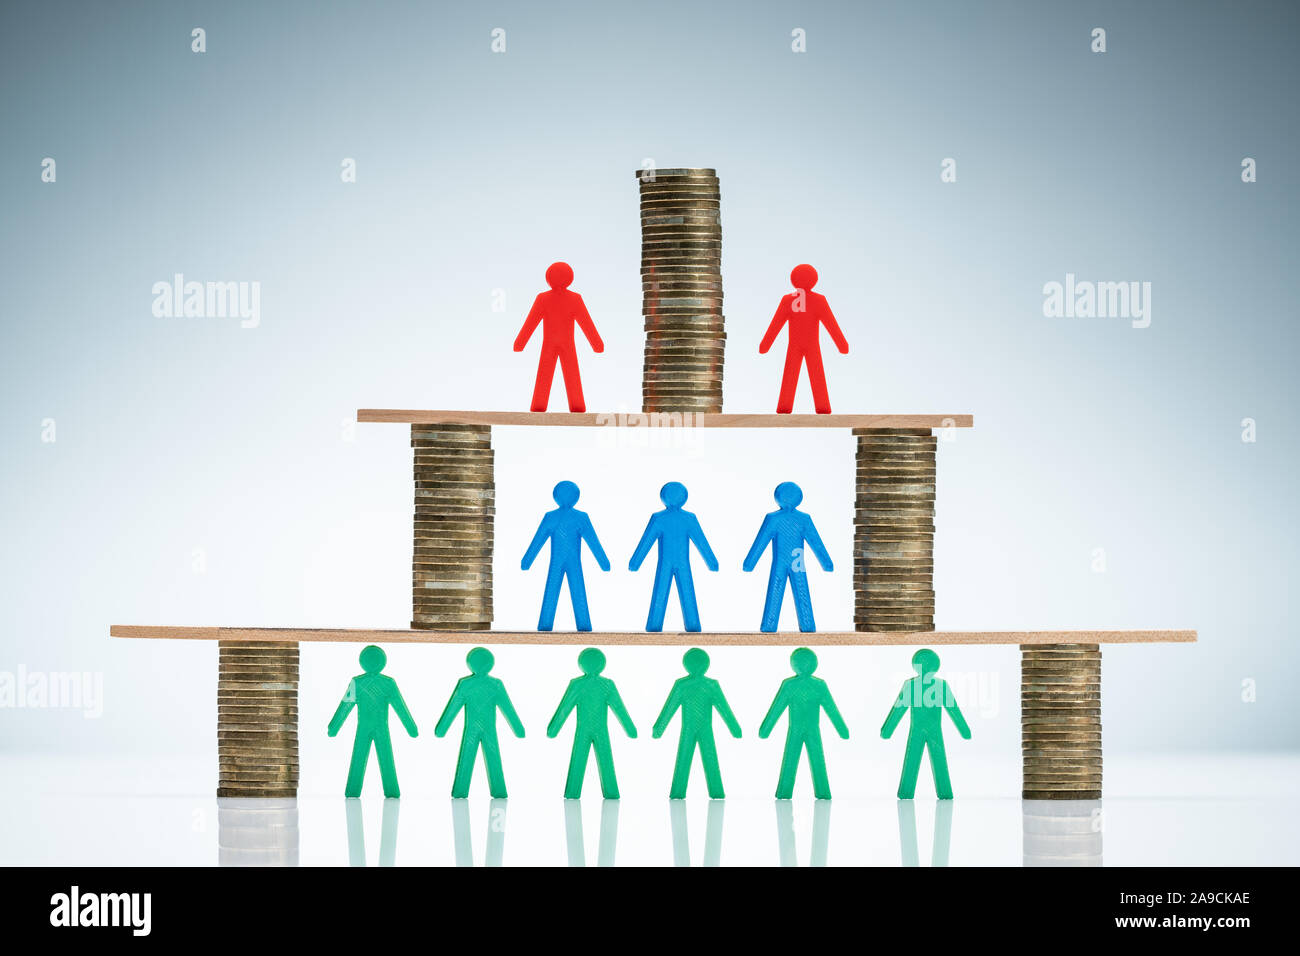 Corporate Hierarchy Concept With Stacked Of Coins And Colorful Human Figures Against Colored Background Stock Photo